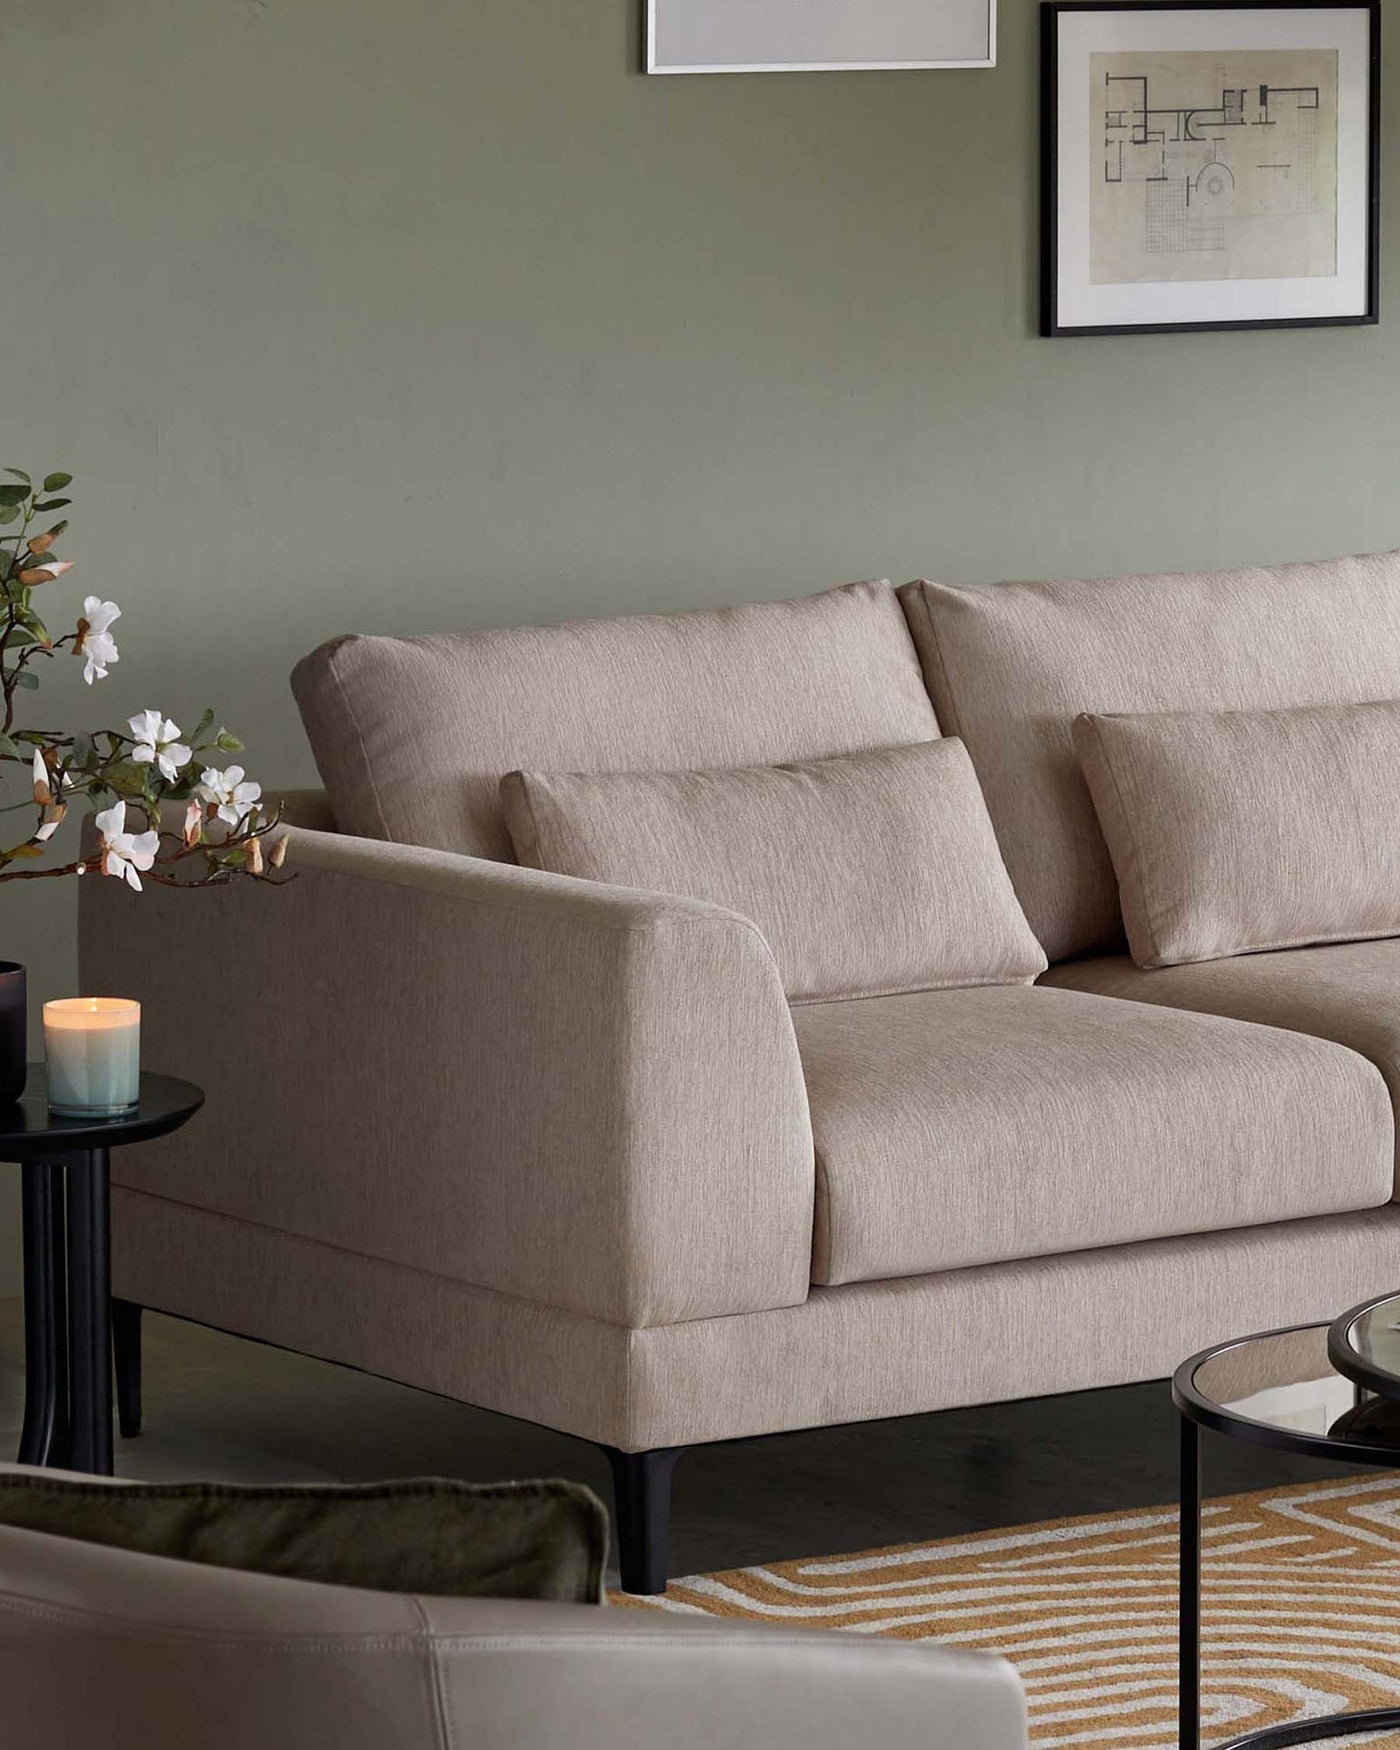 A contemporary beige three-seater sofa with a minimalist design, featuring straight lines and square-edged cushion padding. The sofa sits on low-profile dark legs, complementing a sleek silhouette. Beside it is a small round black side table with a glass top, hosting a lit candle. Behind the sofa, there is a simple artwork in a black frame, enhancing the modern aesthetic of the room. A cream-colored carpet with yellow and beige geometric patterns lies partially visible on the floor.